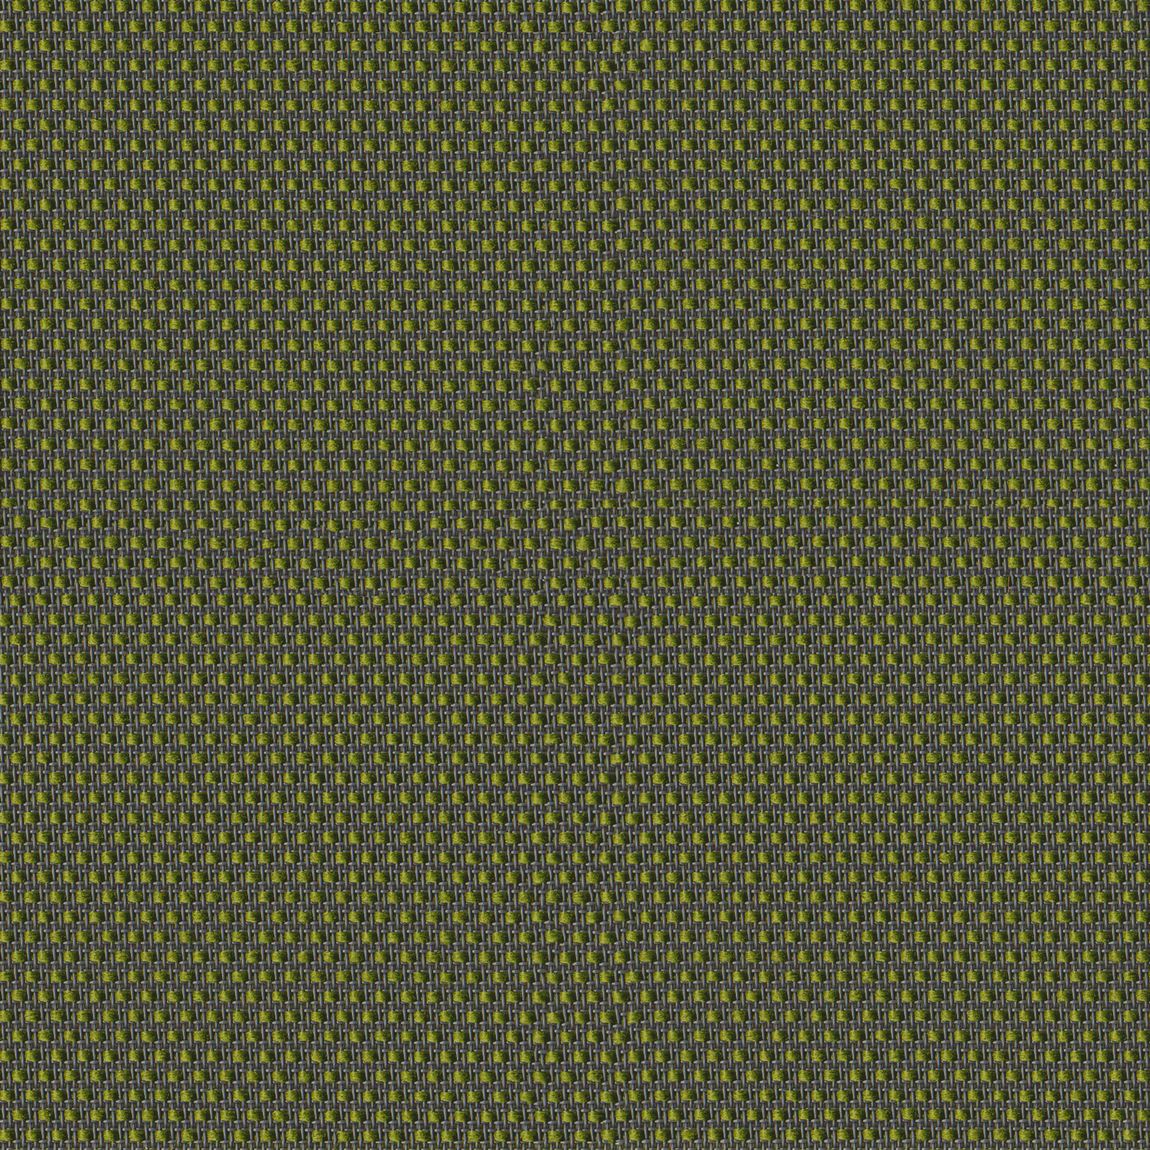 Chartreuse Mesh